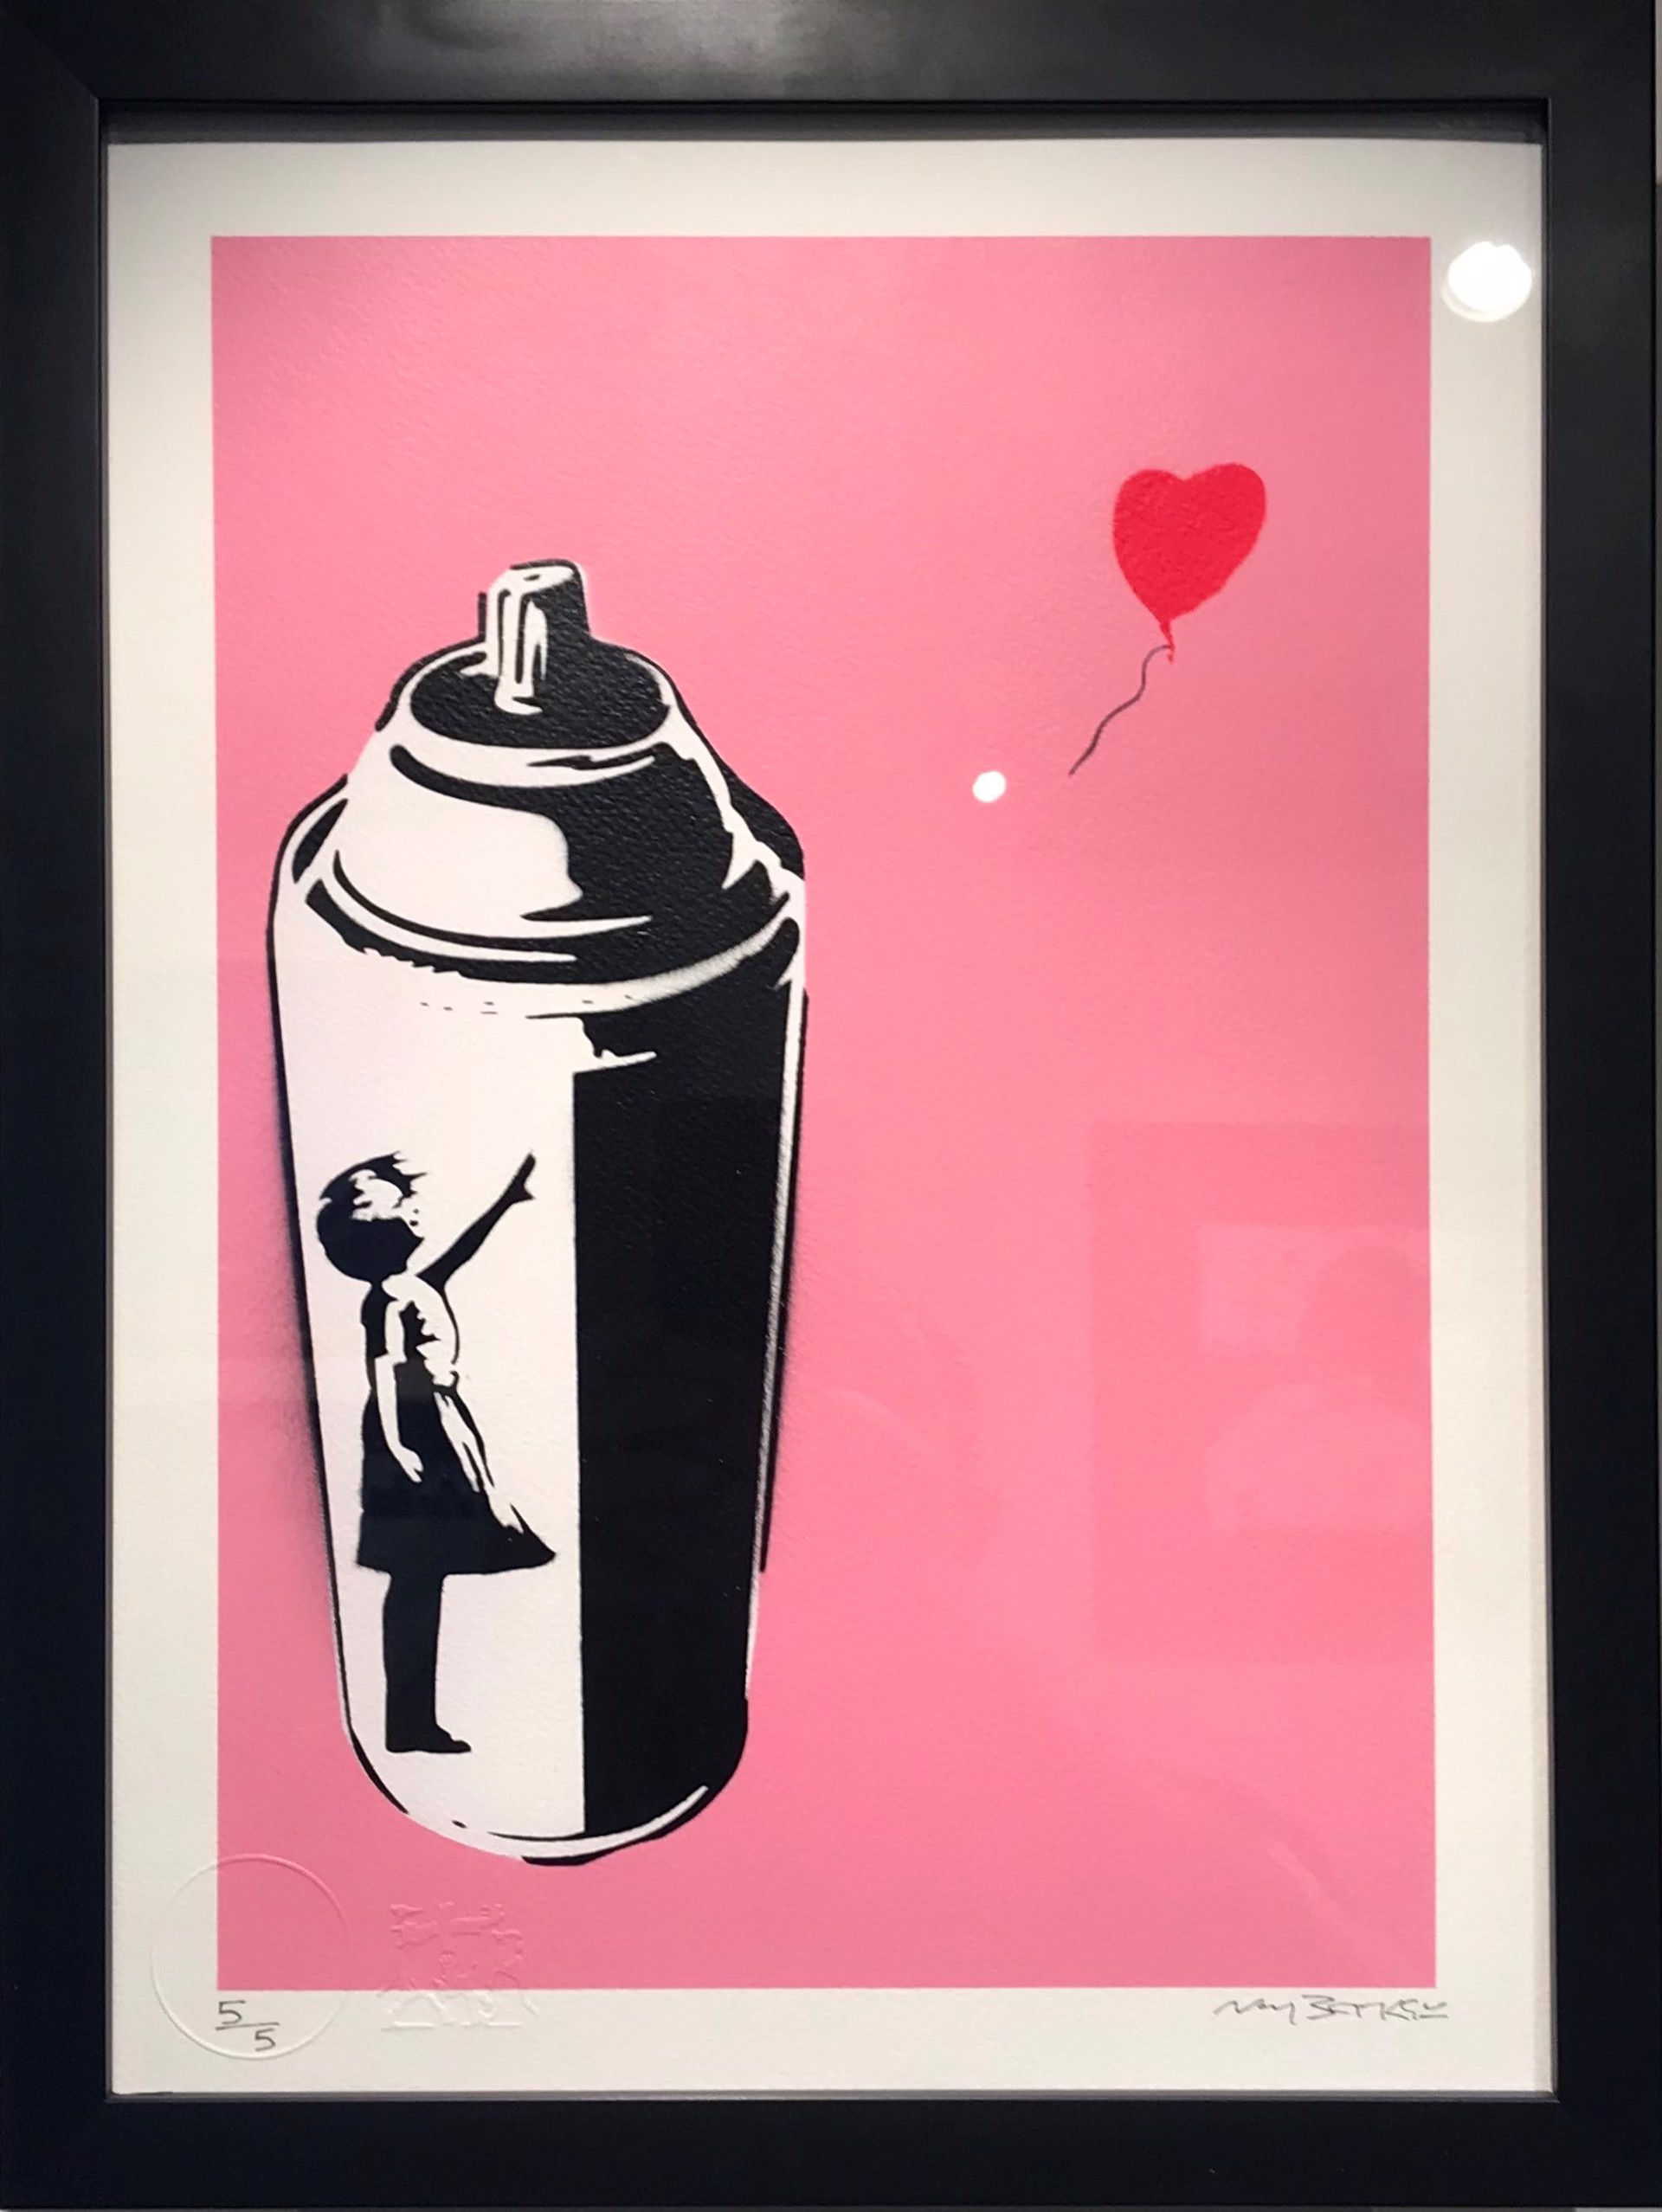 Balloon Girl Spray Can (Pink) 5/5 by Not Banksy